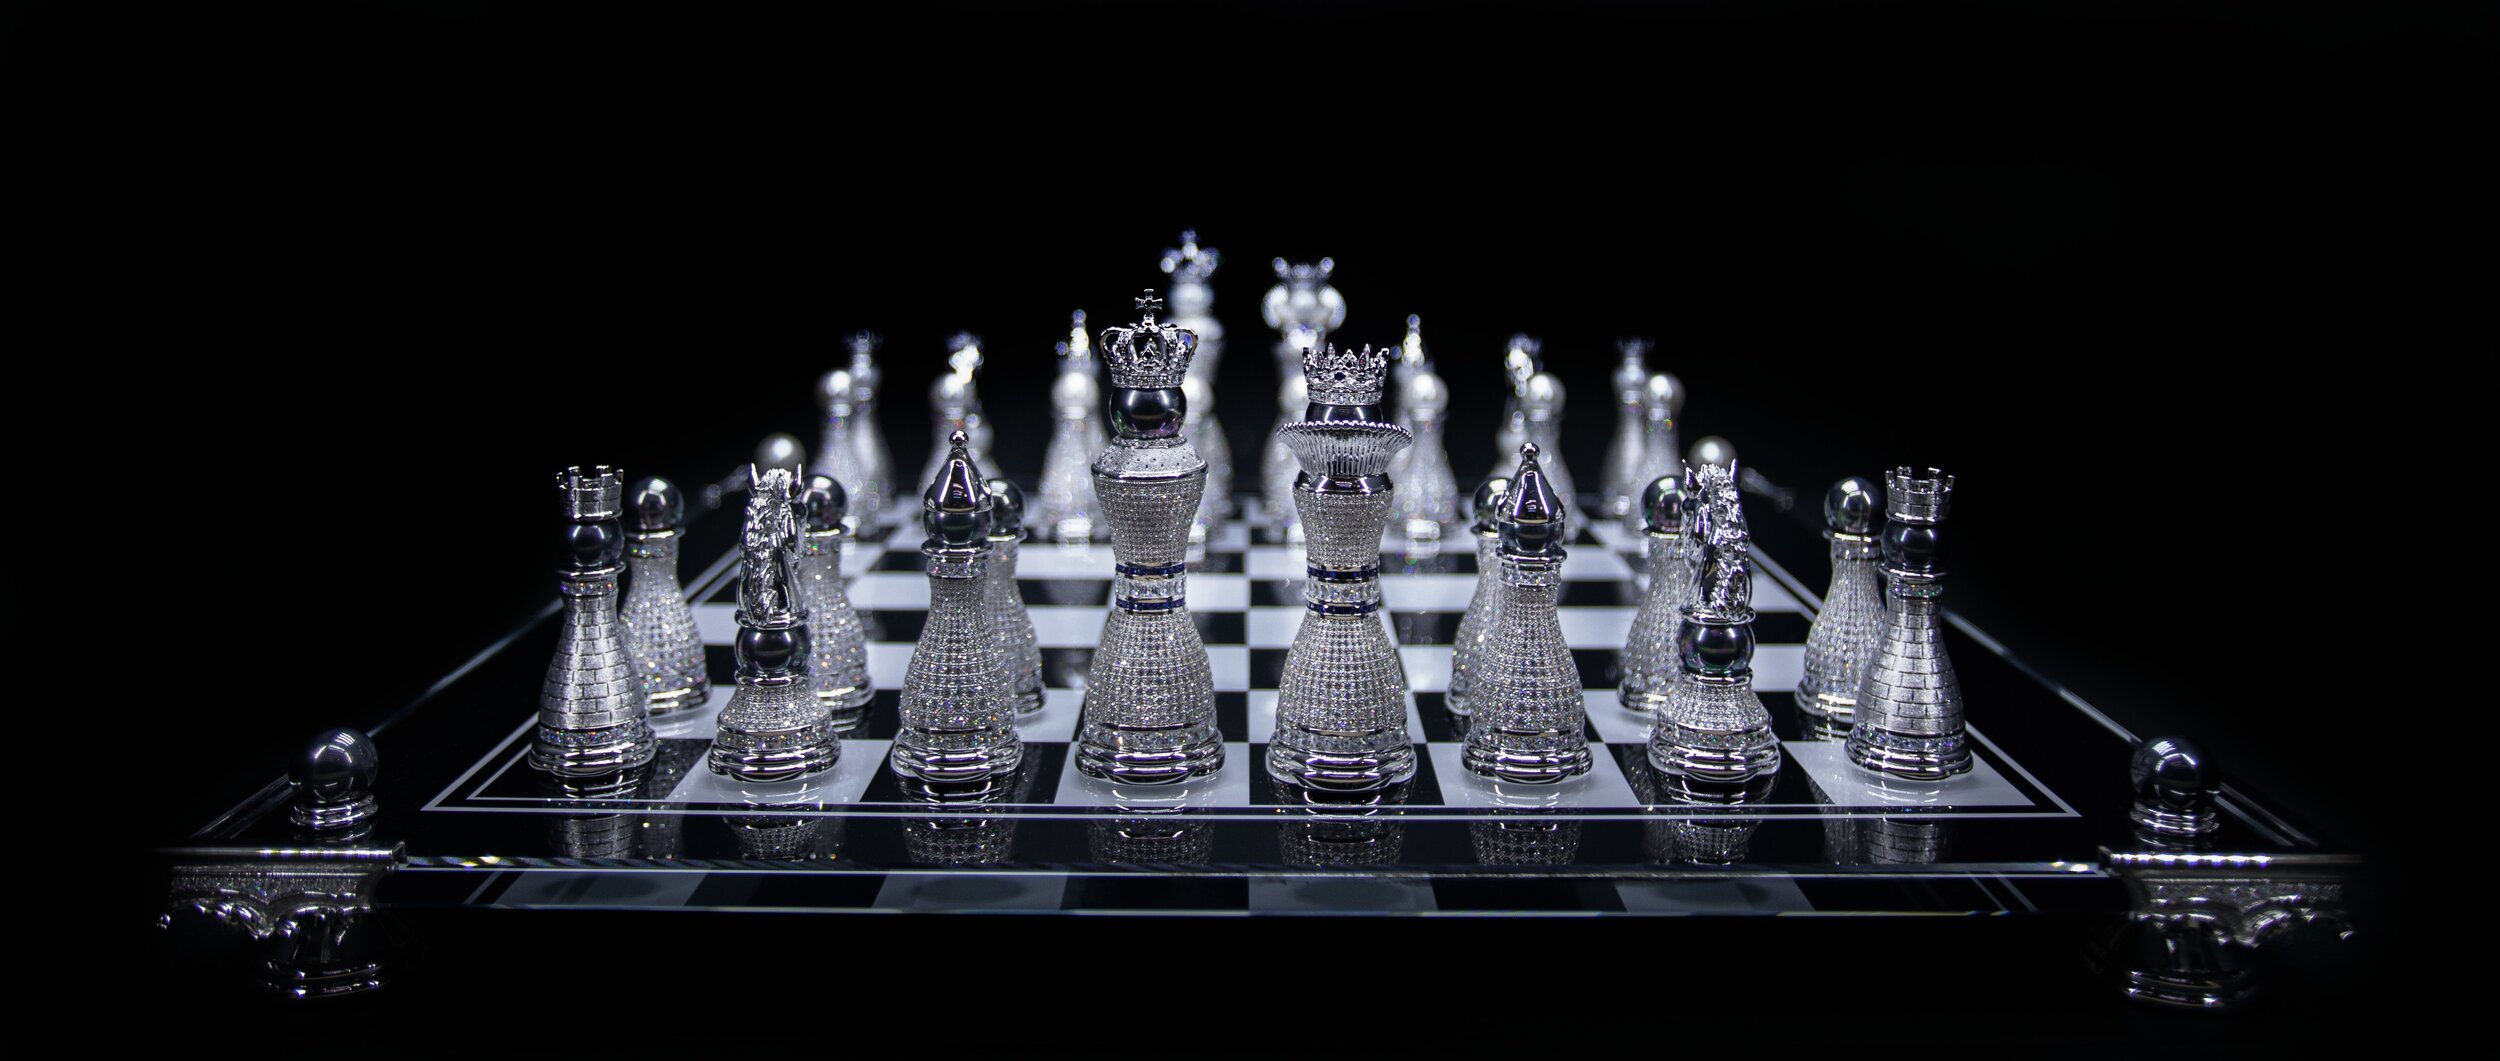 most expensive chess board ever